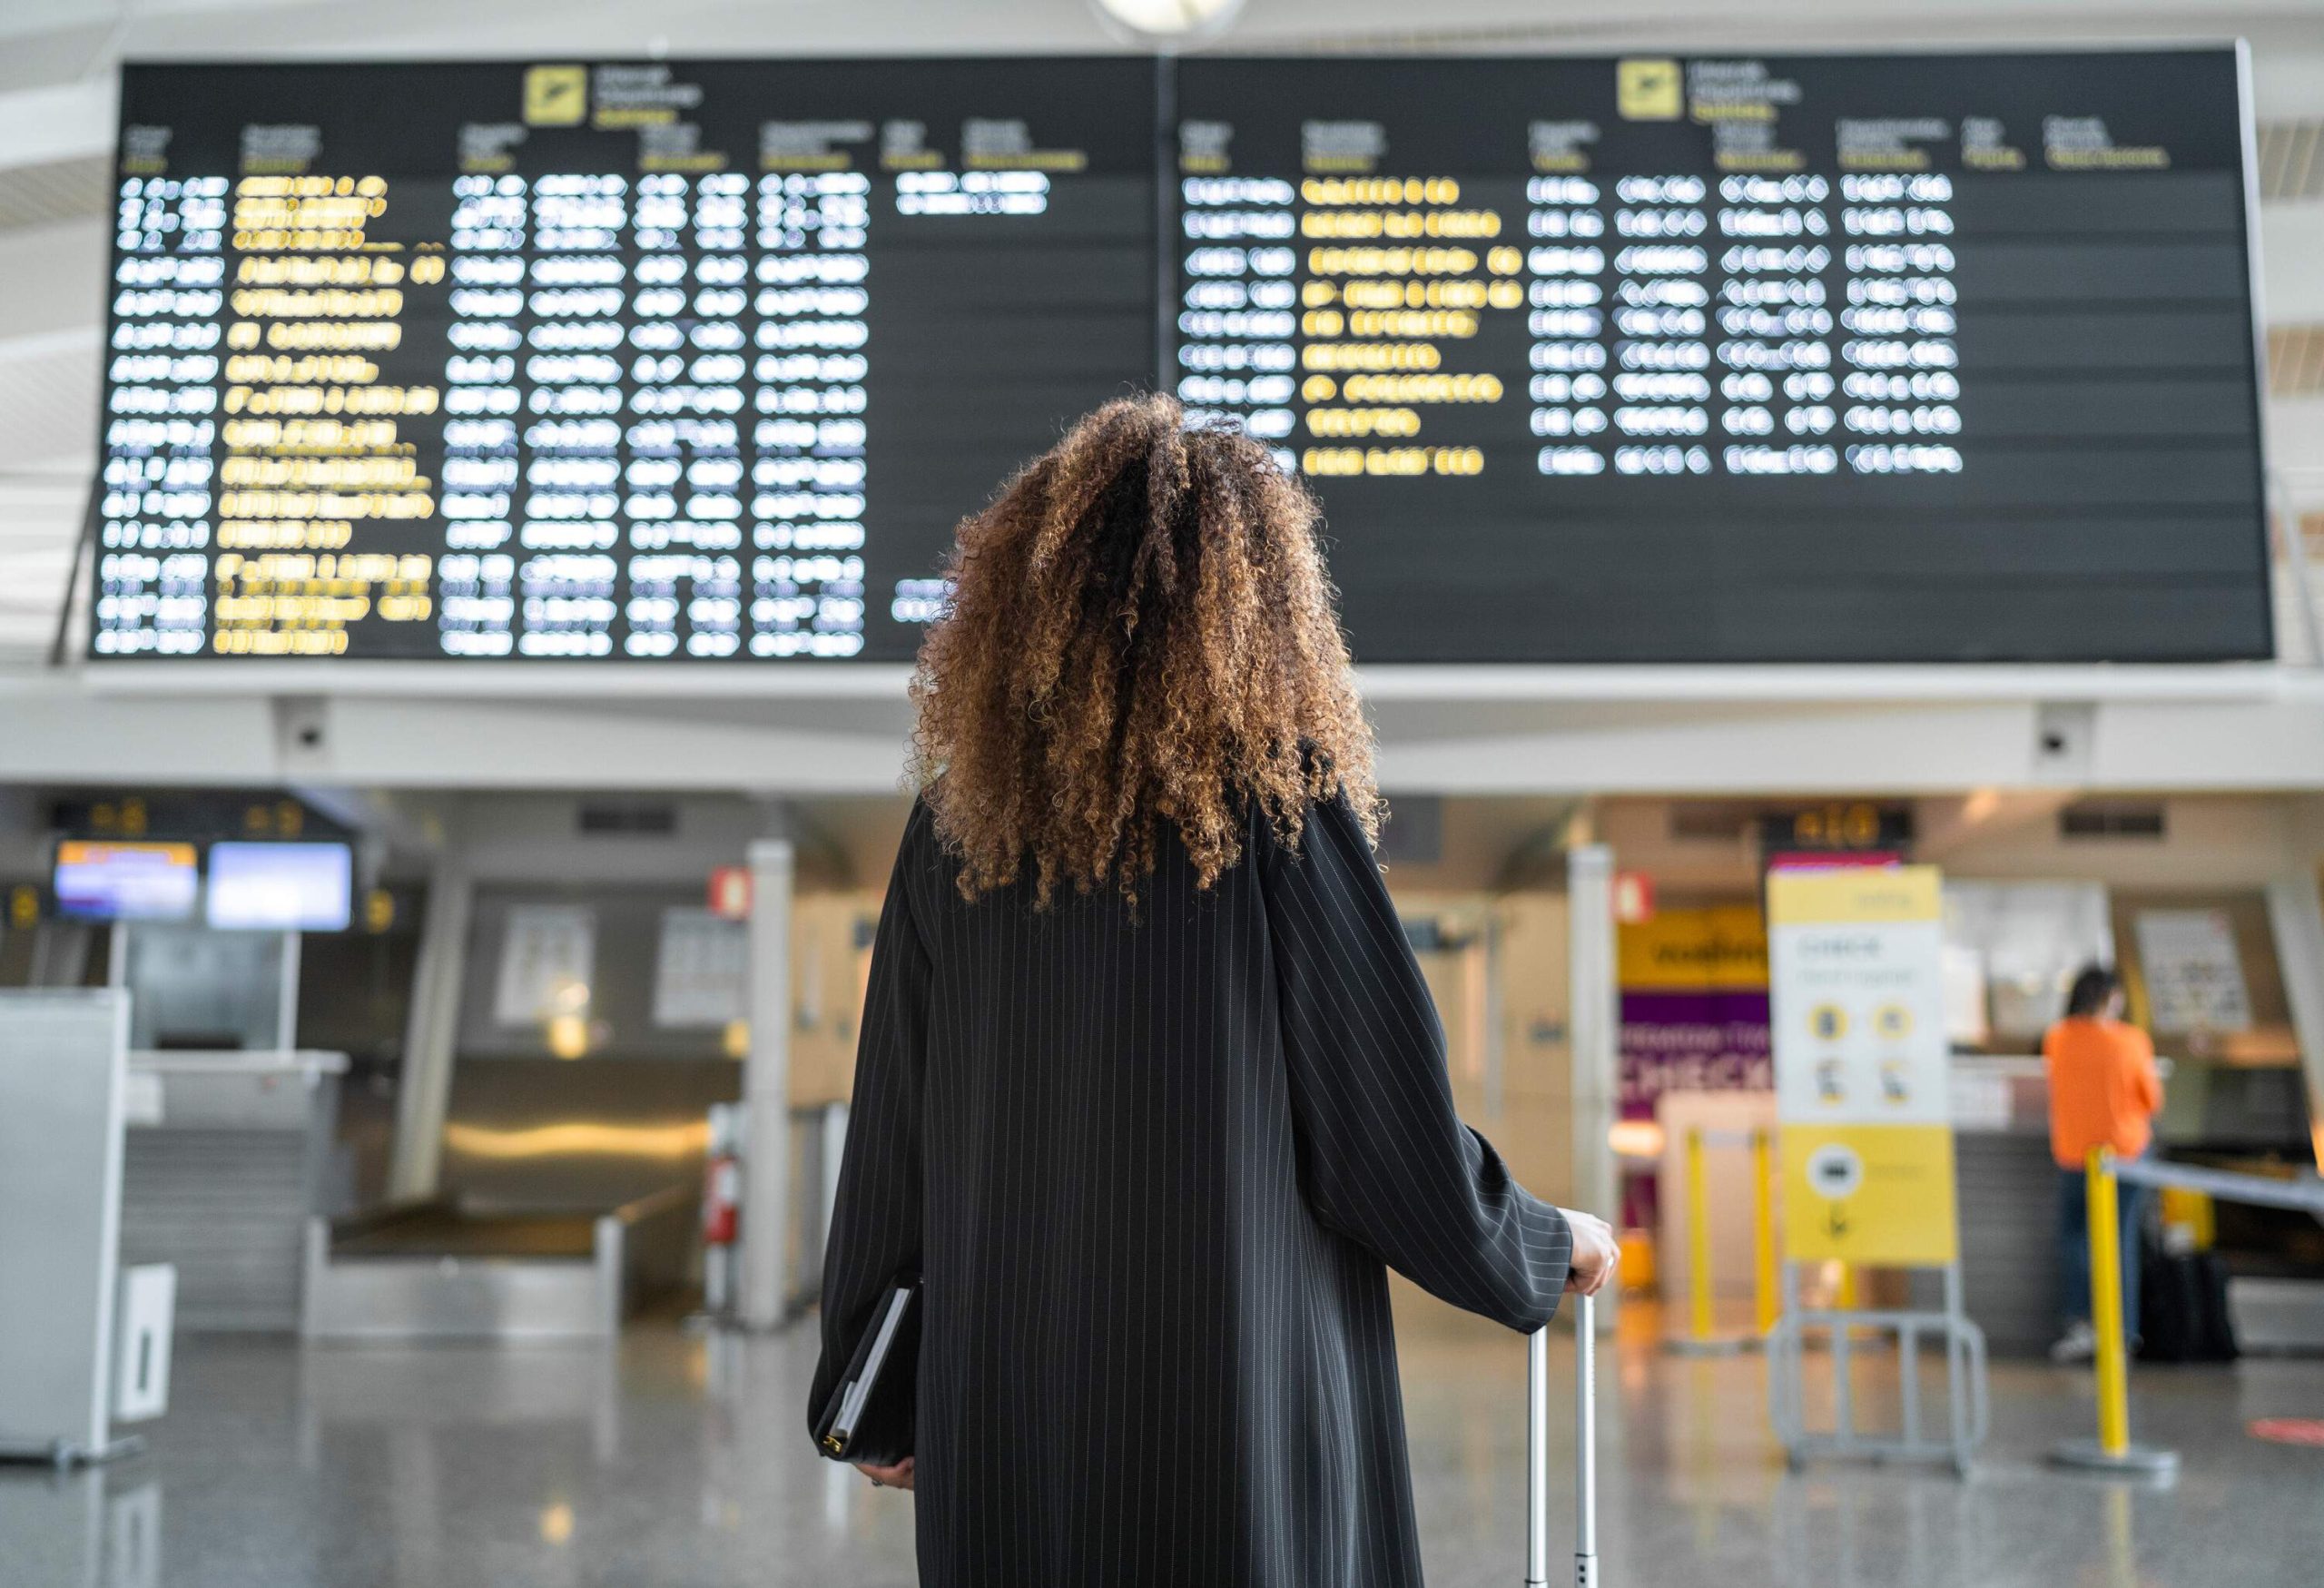 A curly-haired person in a black dress stands in front of an airport flight information display.